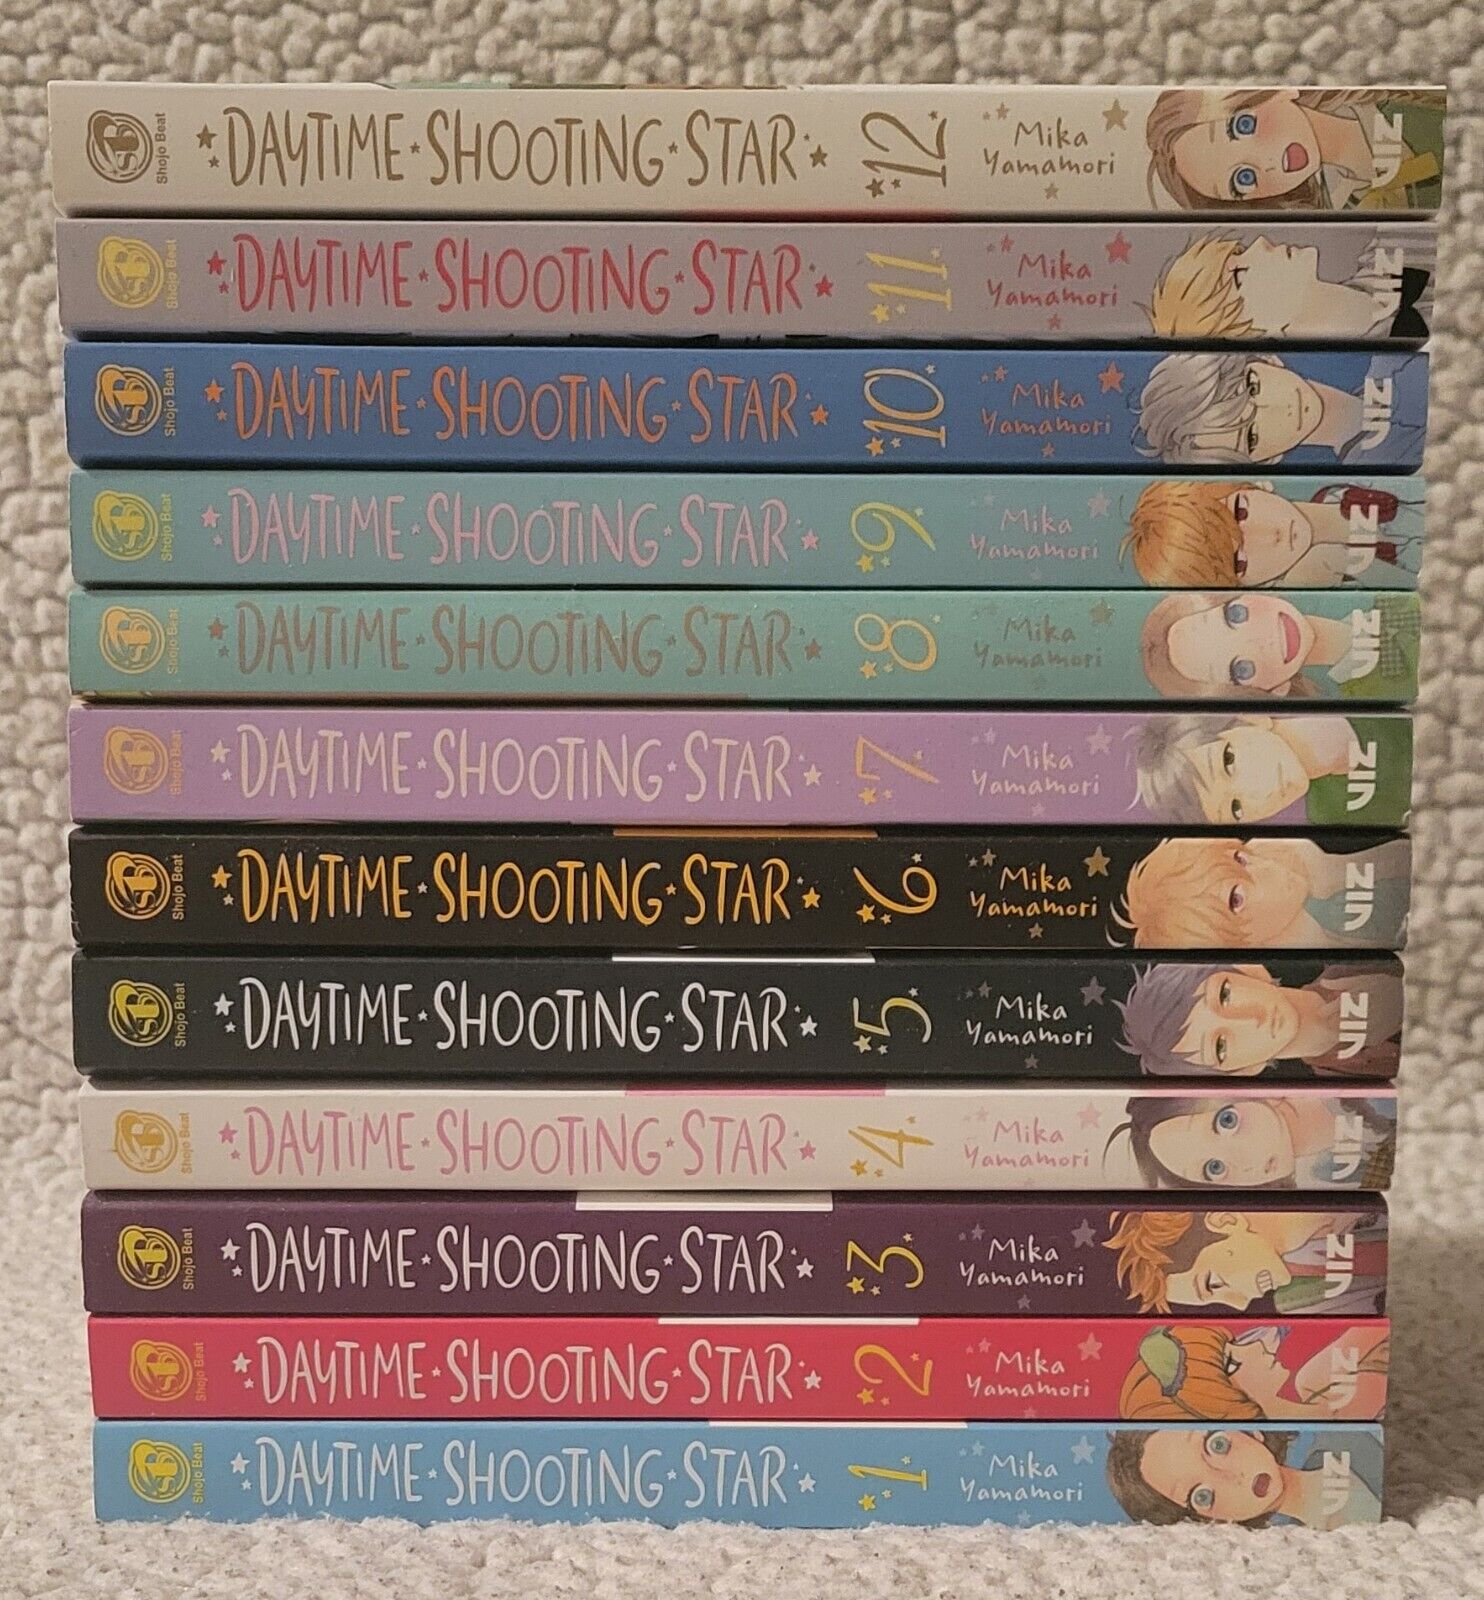 Daytime Shooting Star Manga - English - Complete Set - Only Read Once